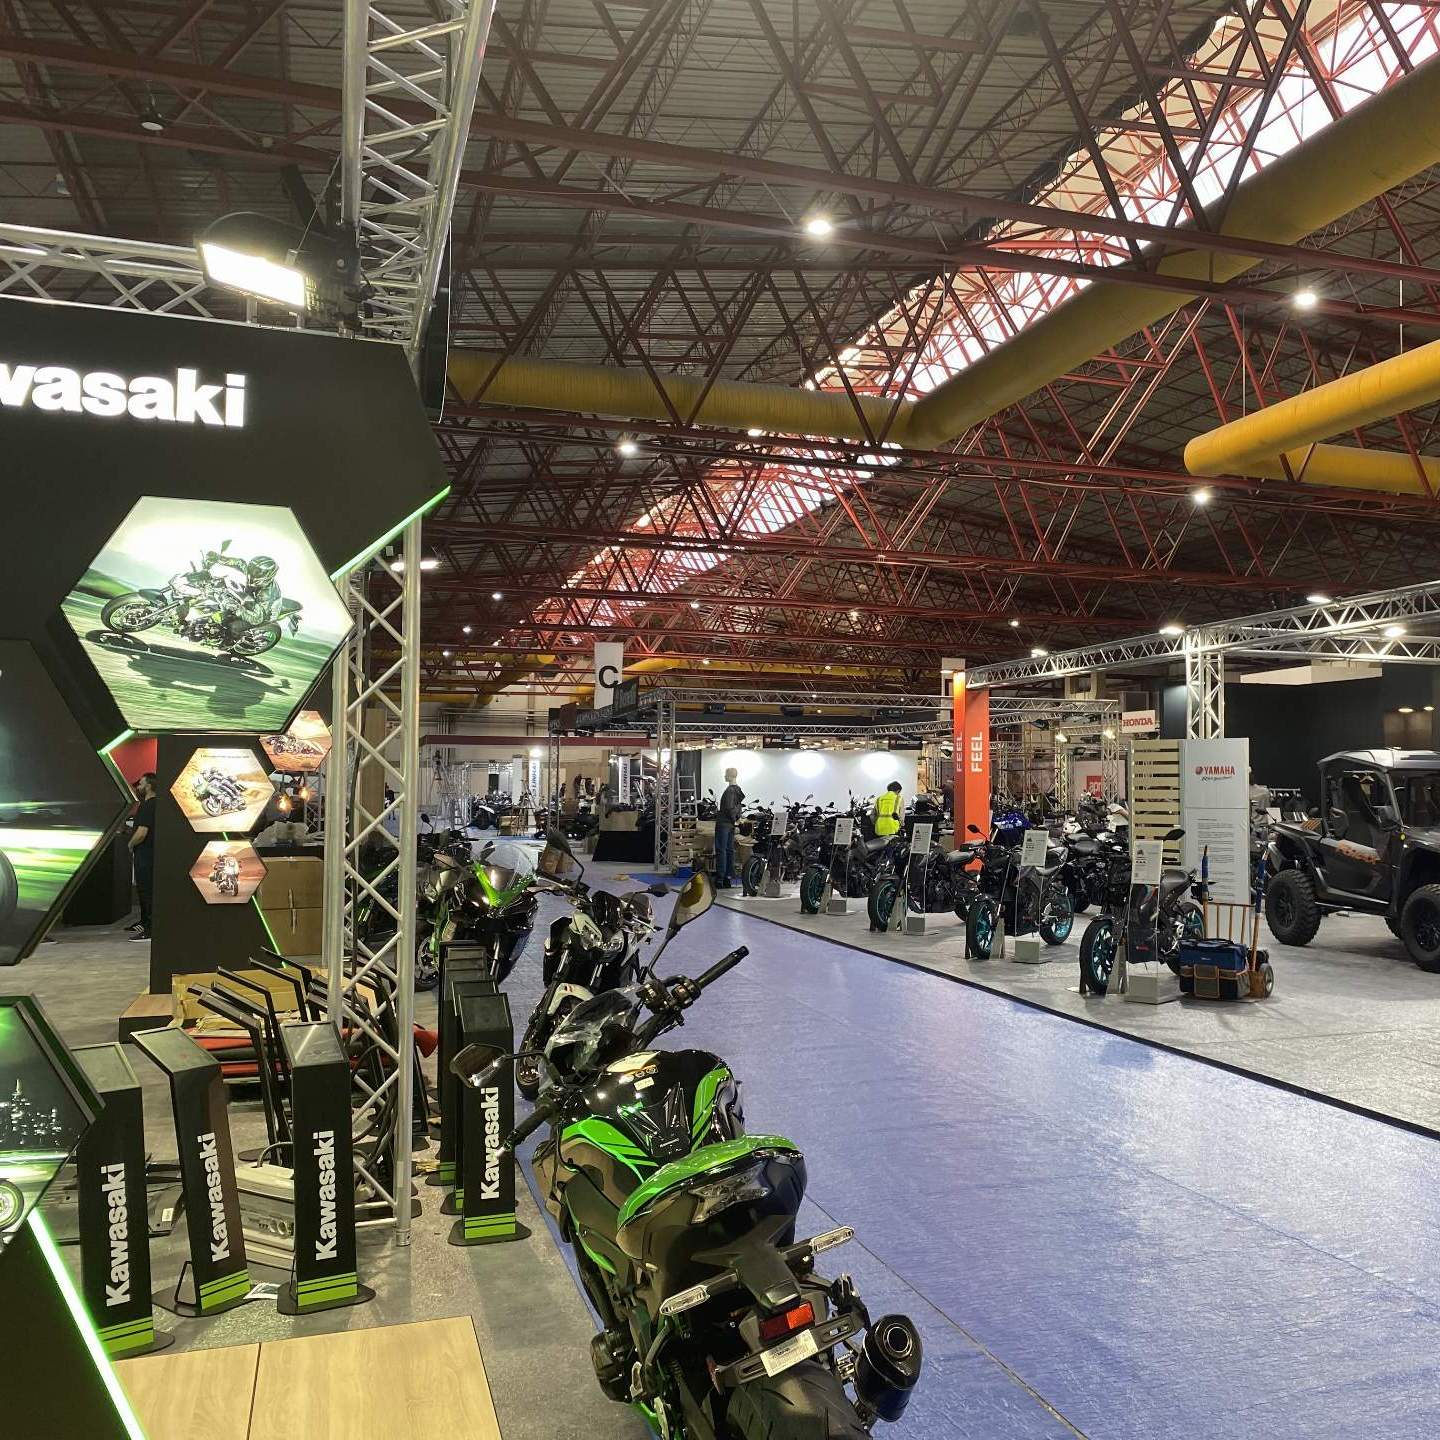 Expomoto: More than 70 thousand visitors expected in the largest national two-wheel exhibition